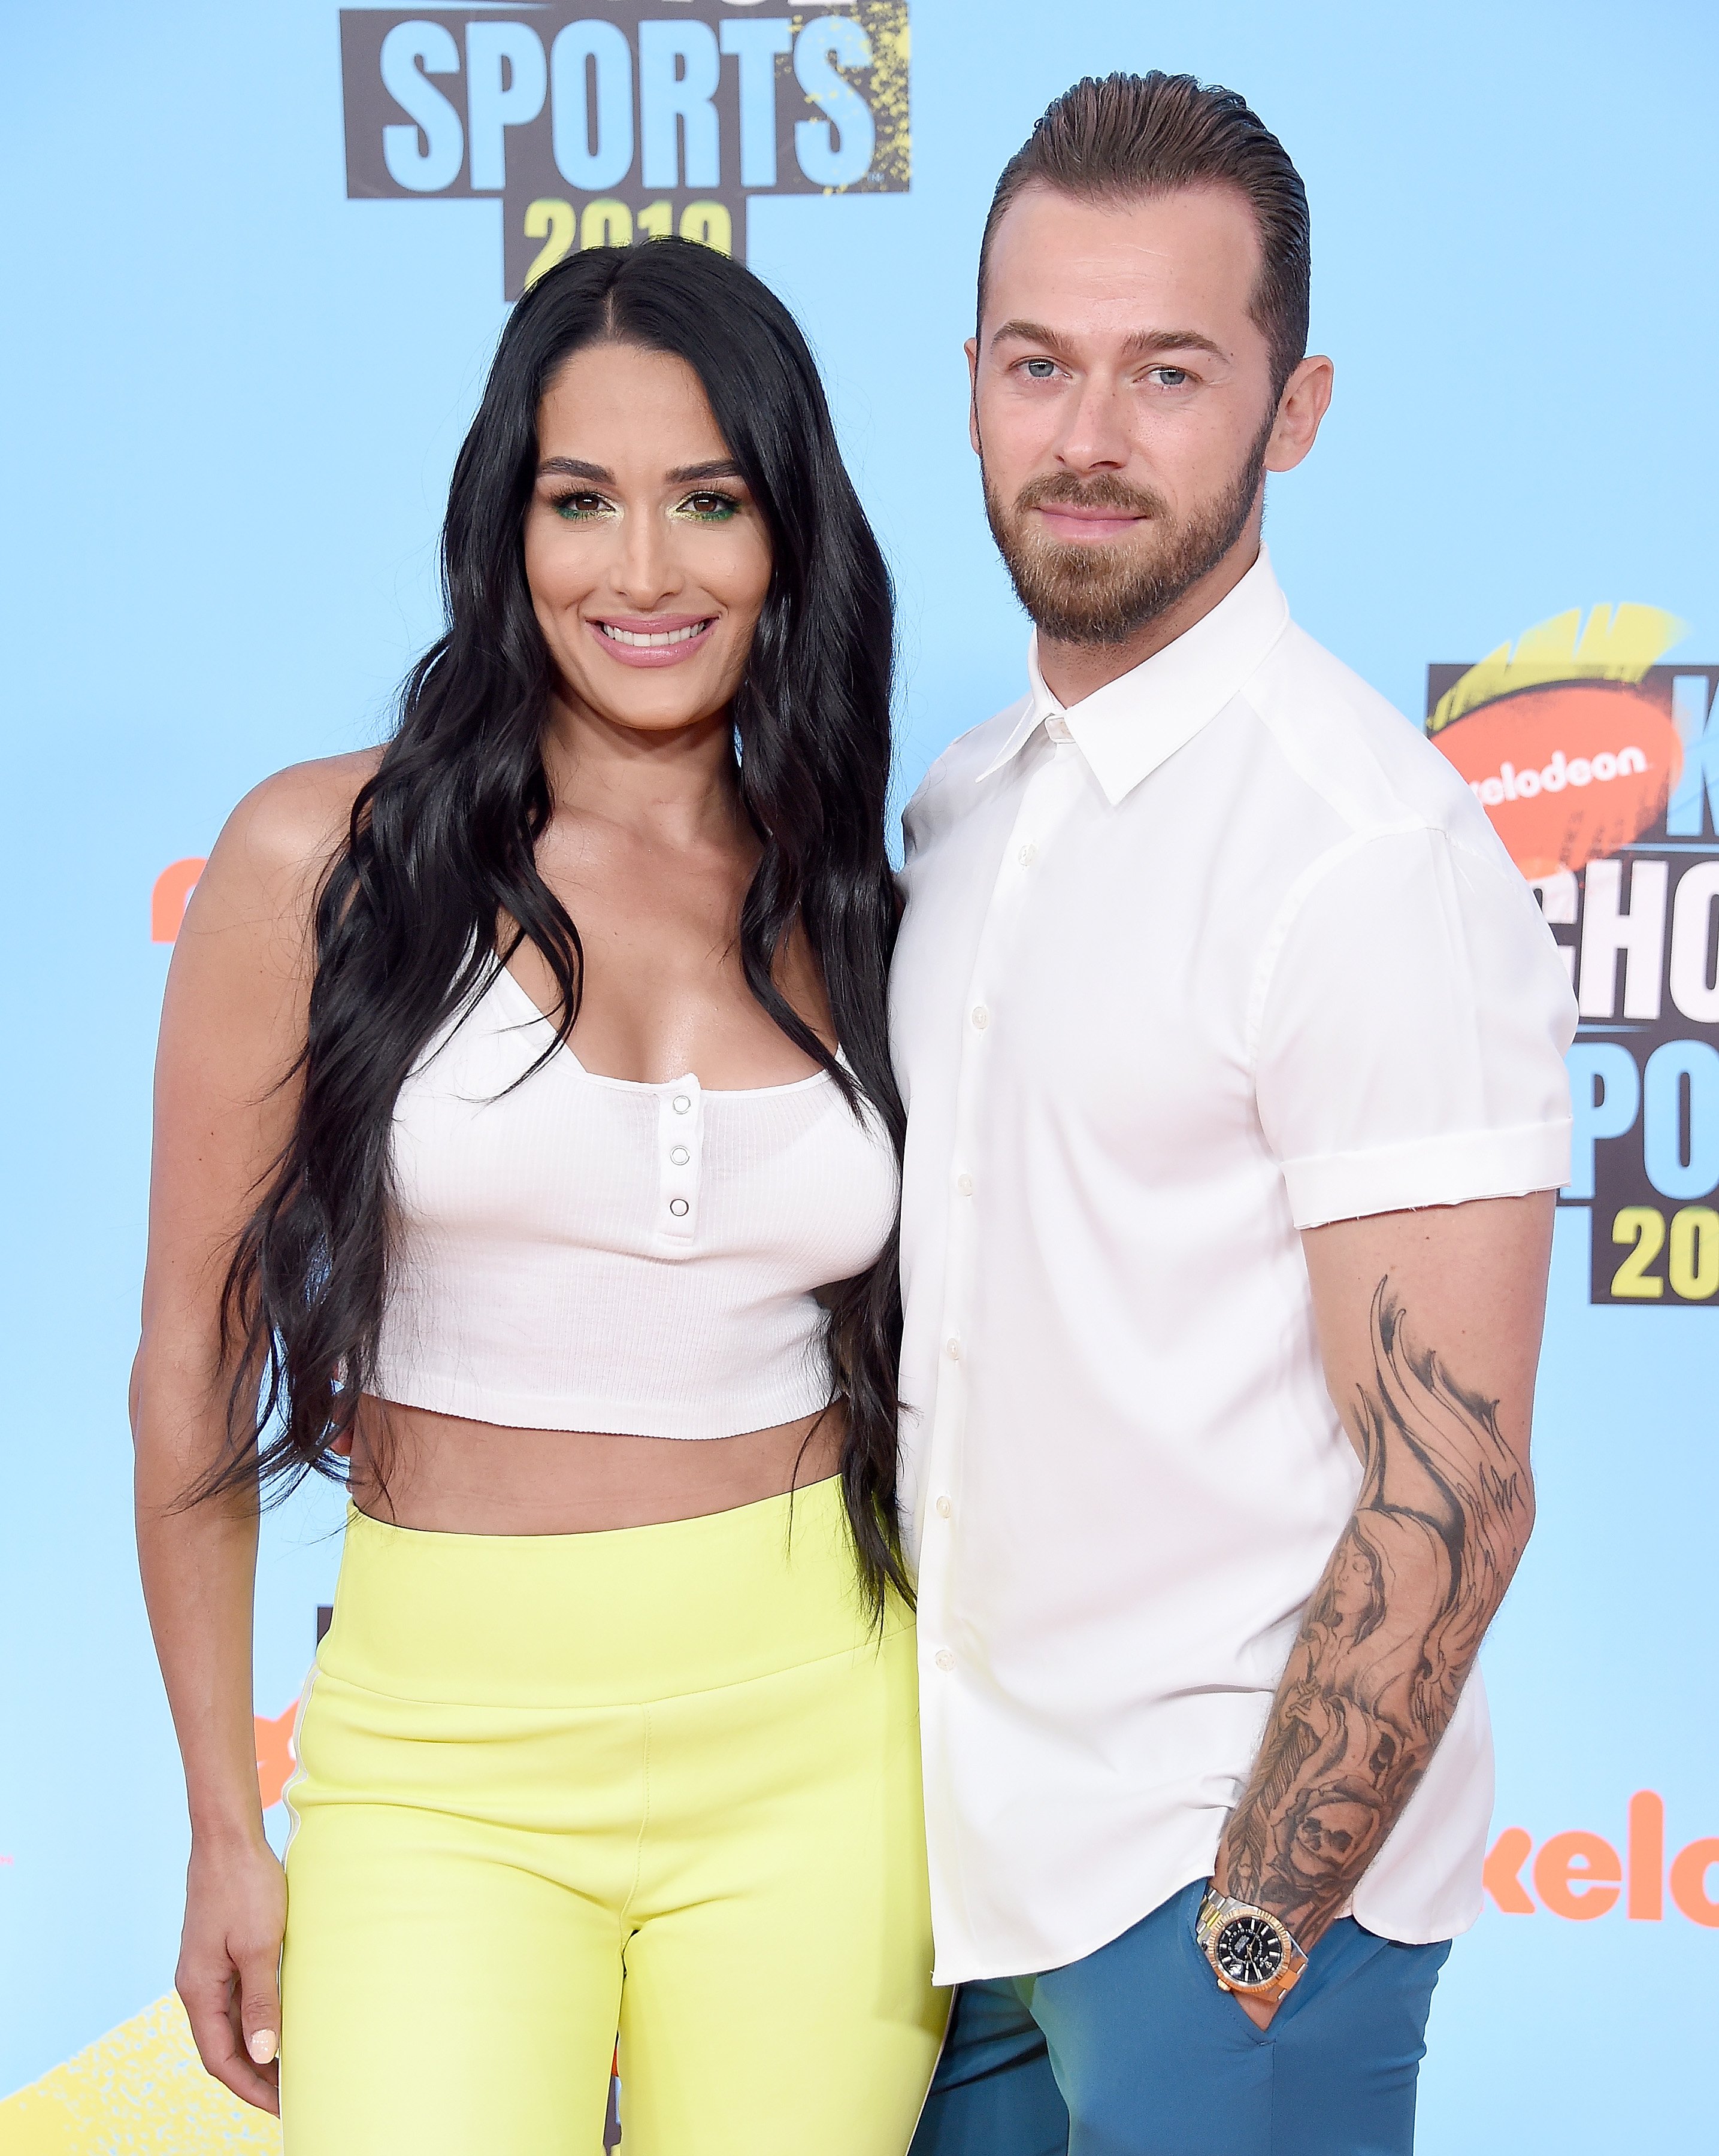 "Total Bellas" star Nikki Bella with fiance Artem Chigvintsev attends the 2019 Nickelodeon's Kids Choice Sports in Santa Monica, California. | Photo: Getty Images